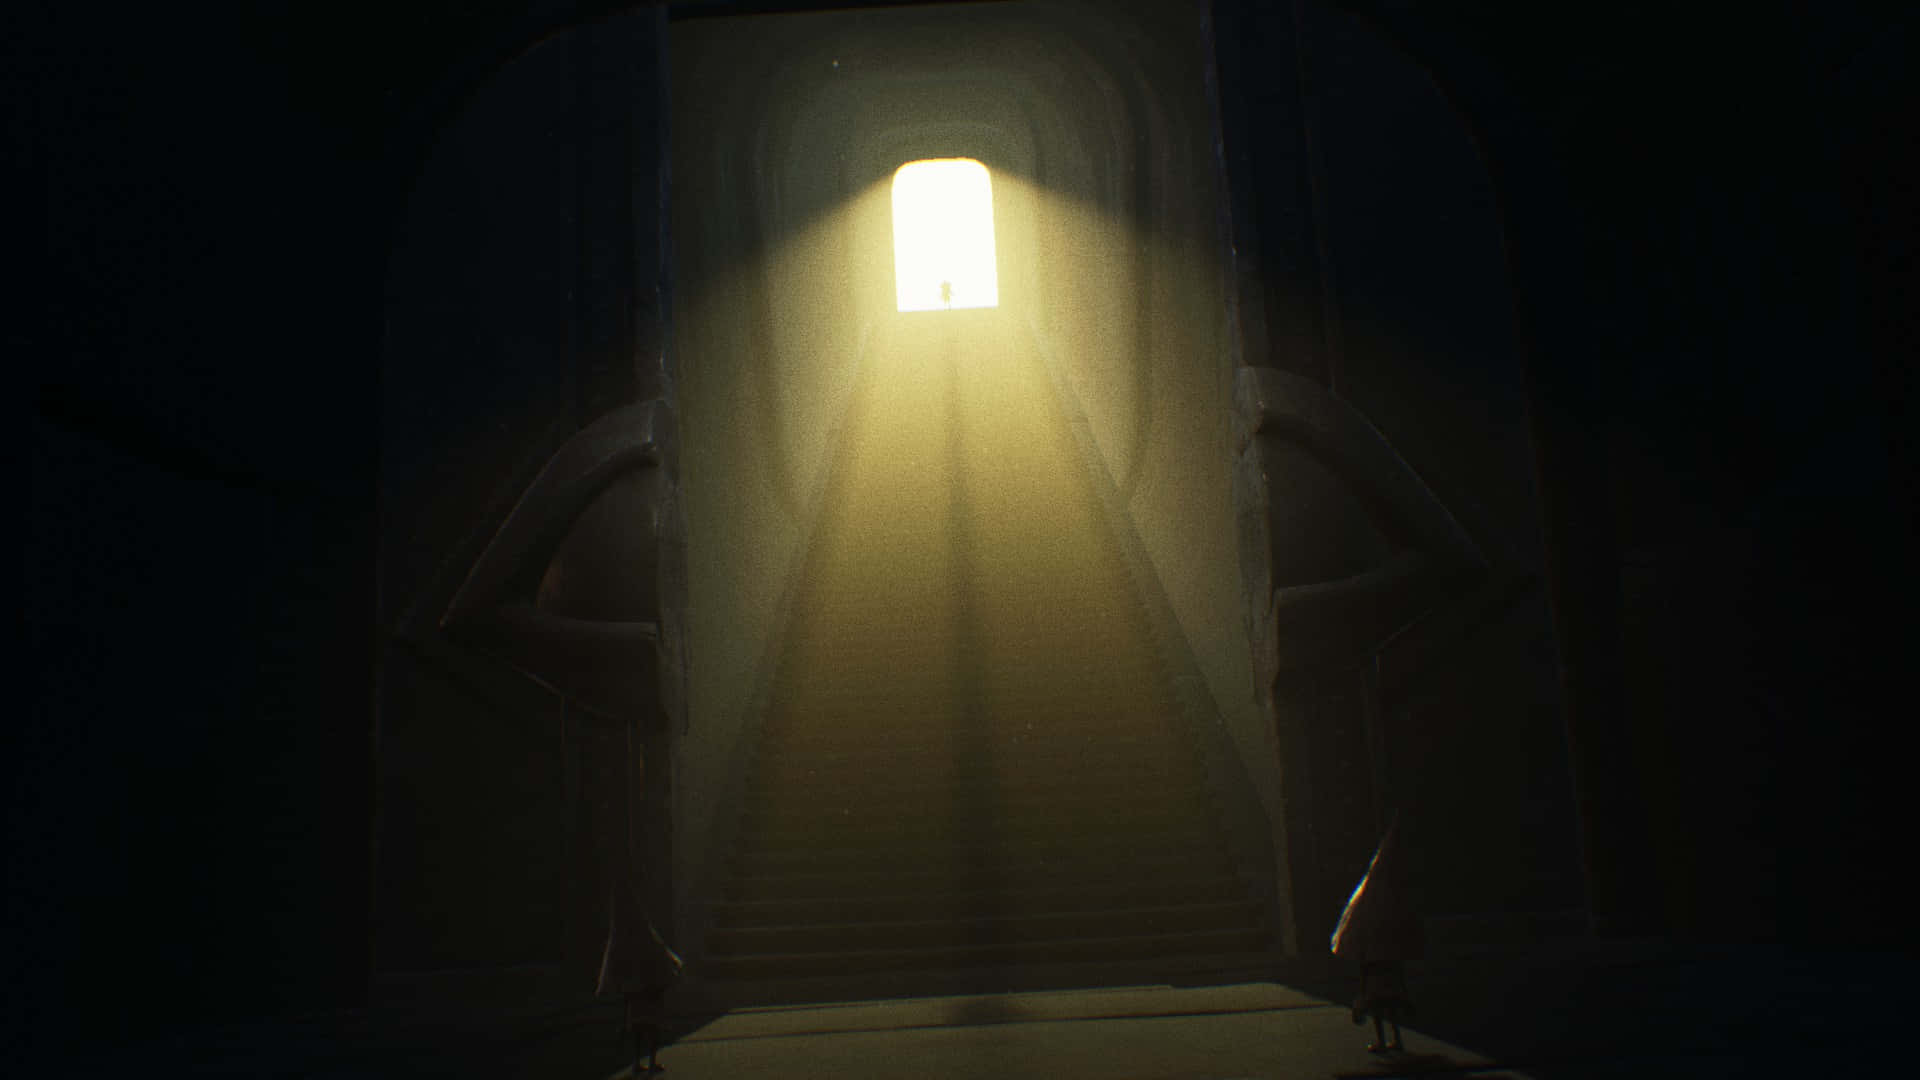 Mysterious and dark scene from Little Nightmares game